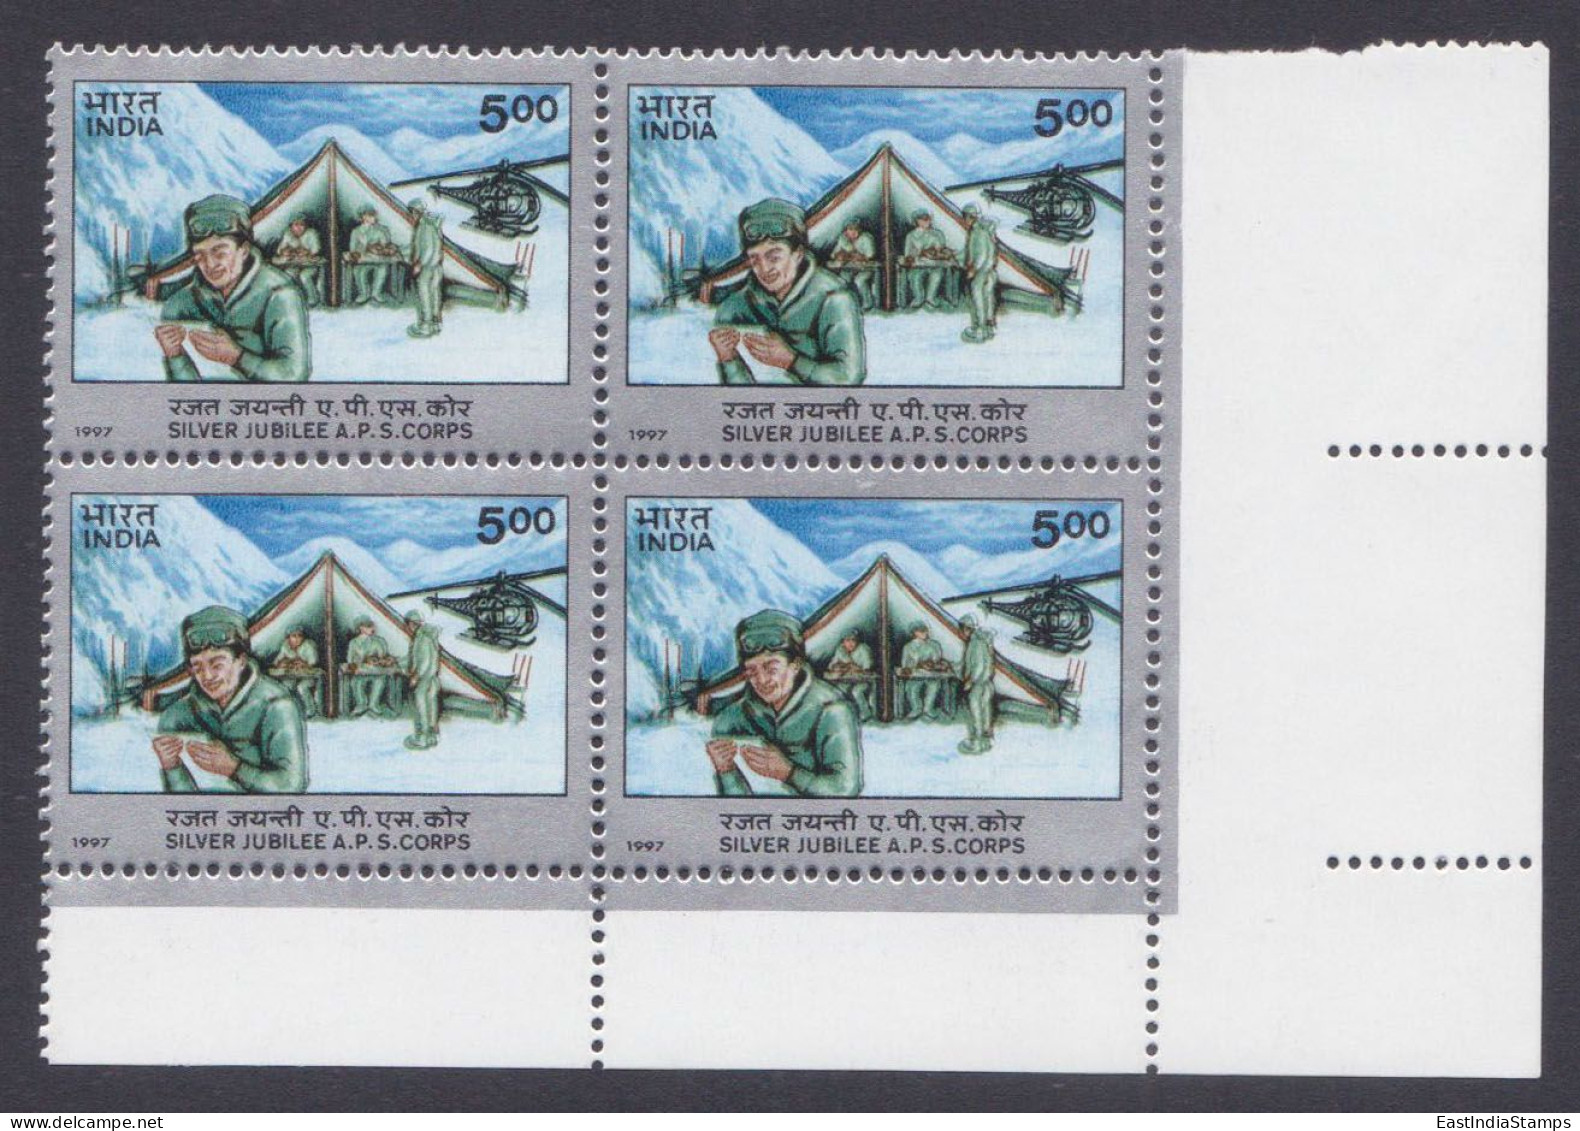 Inde India 1997 MNH A.P.S Army Postal Service Corps, Military, Armed Forces, Mountain, Snow, Helicopter, Mountains Block - Ongebruikt